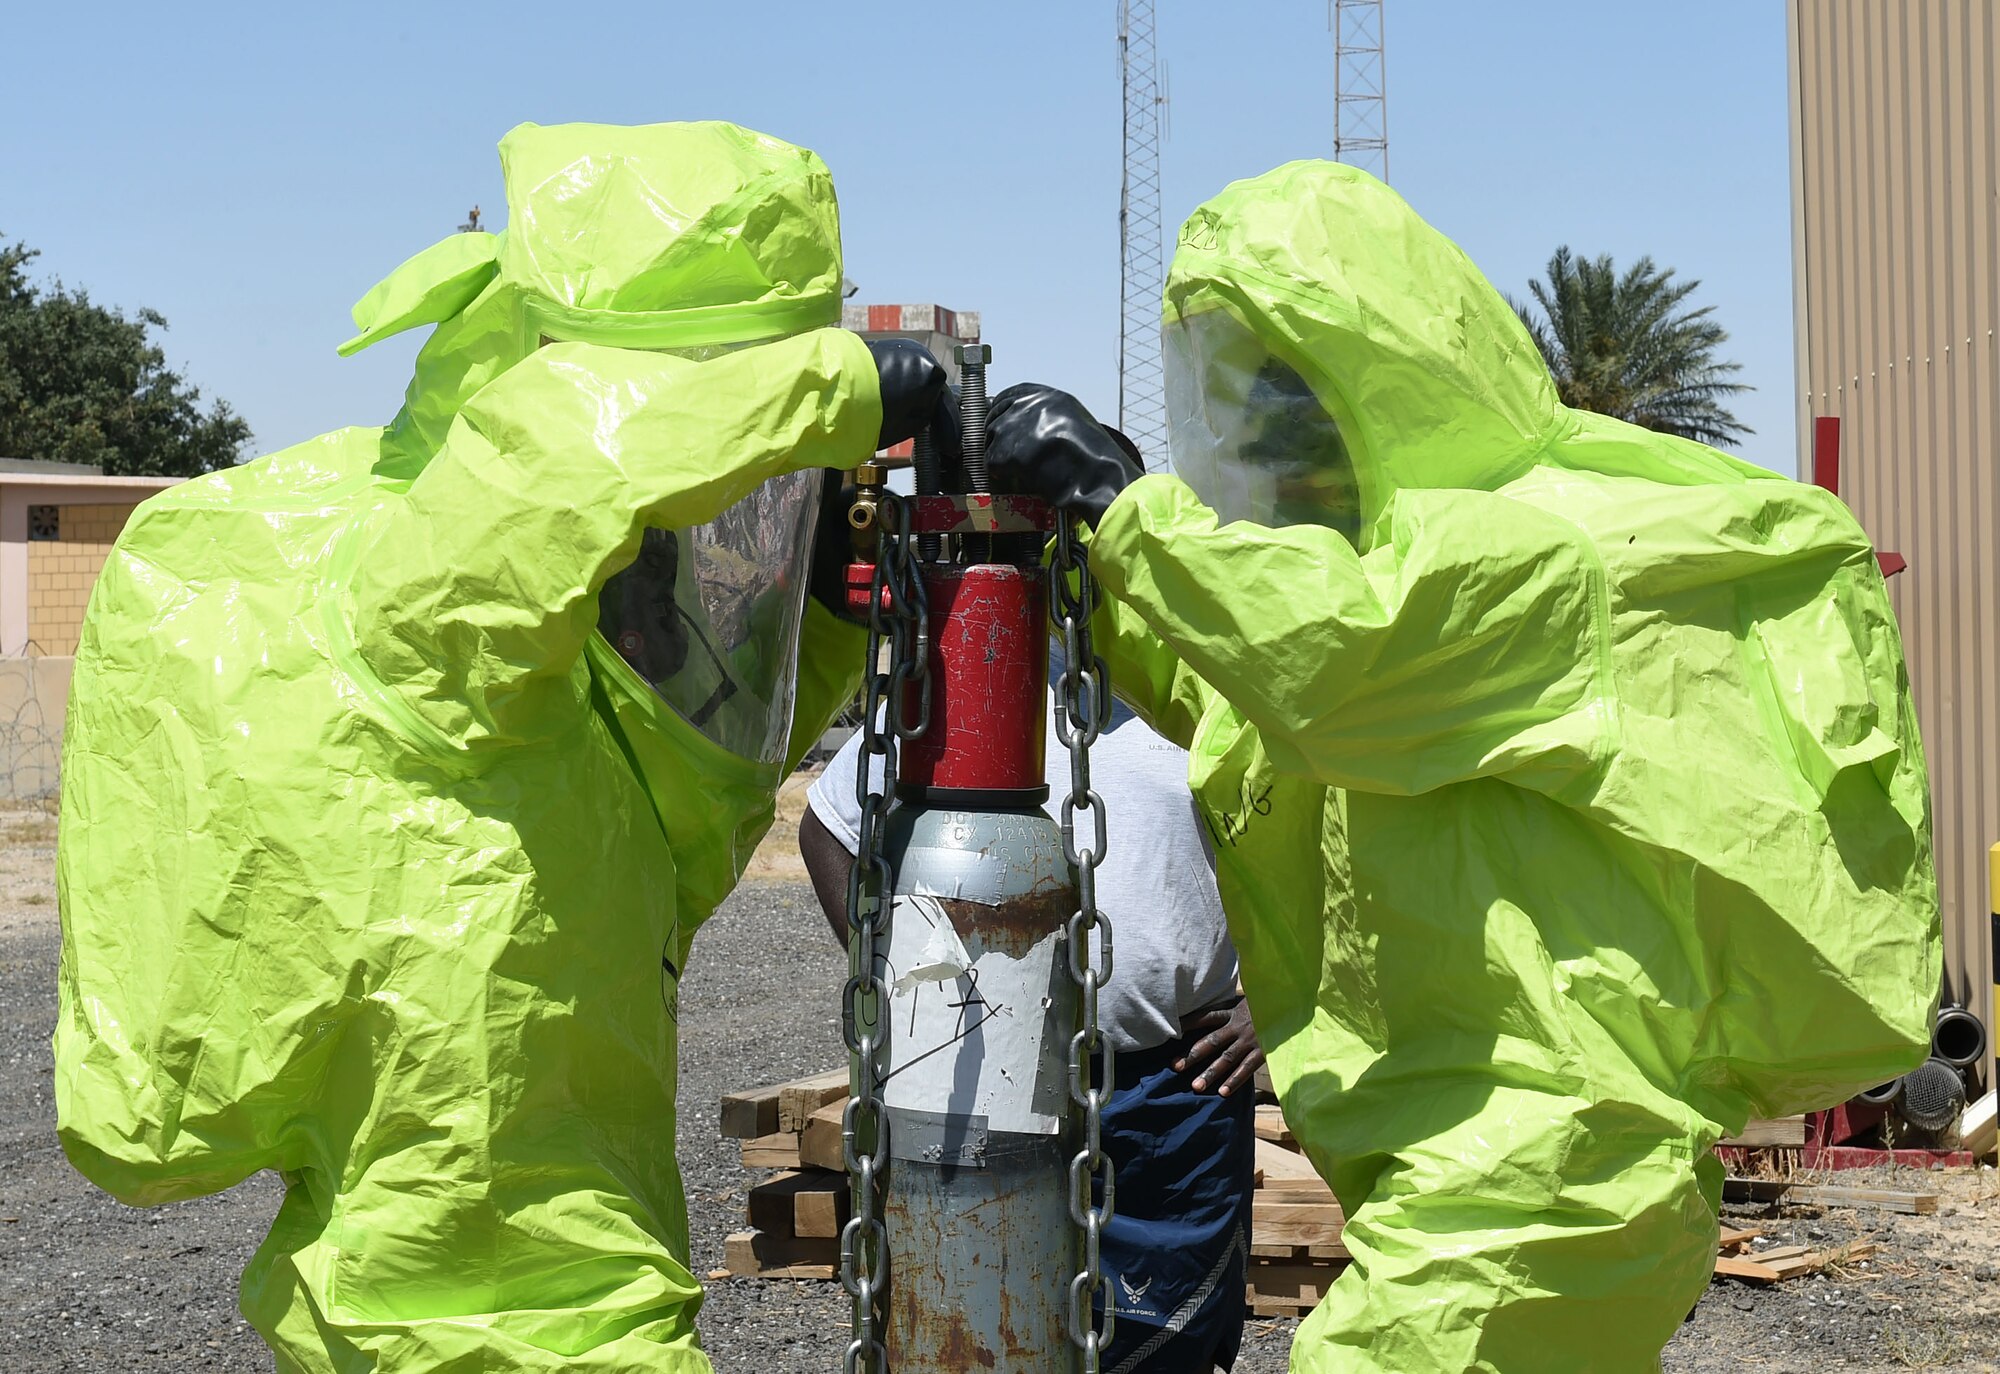 A firefighter from the 386th Expeditionary Civil Engineer Squadron and a firefighter from the 332nd ECES work to control a leaking valve on a simulated chlorine tank during a Hazardous Materials Technician Certification course exercise at an undisclosed location in Southwest Asia, April 15, 2016. The exercise simulated a chlorine gas leak to which the fire department, emergency management and medical teams from the 386th and 332nd ECES teams responded. (U.S. Air Force photo by Staff Sgt. Jerilyn Quintanilla)